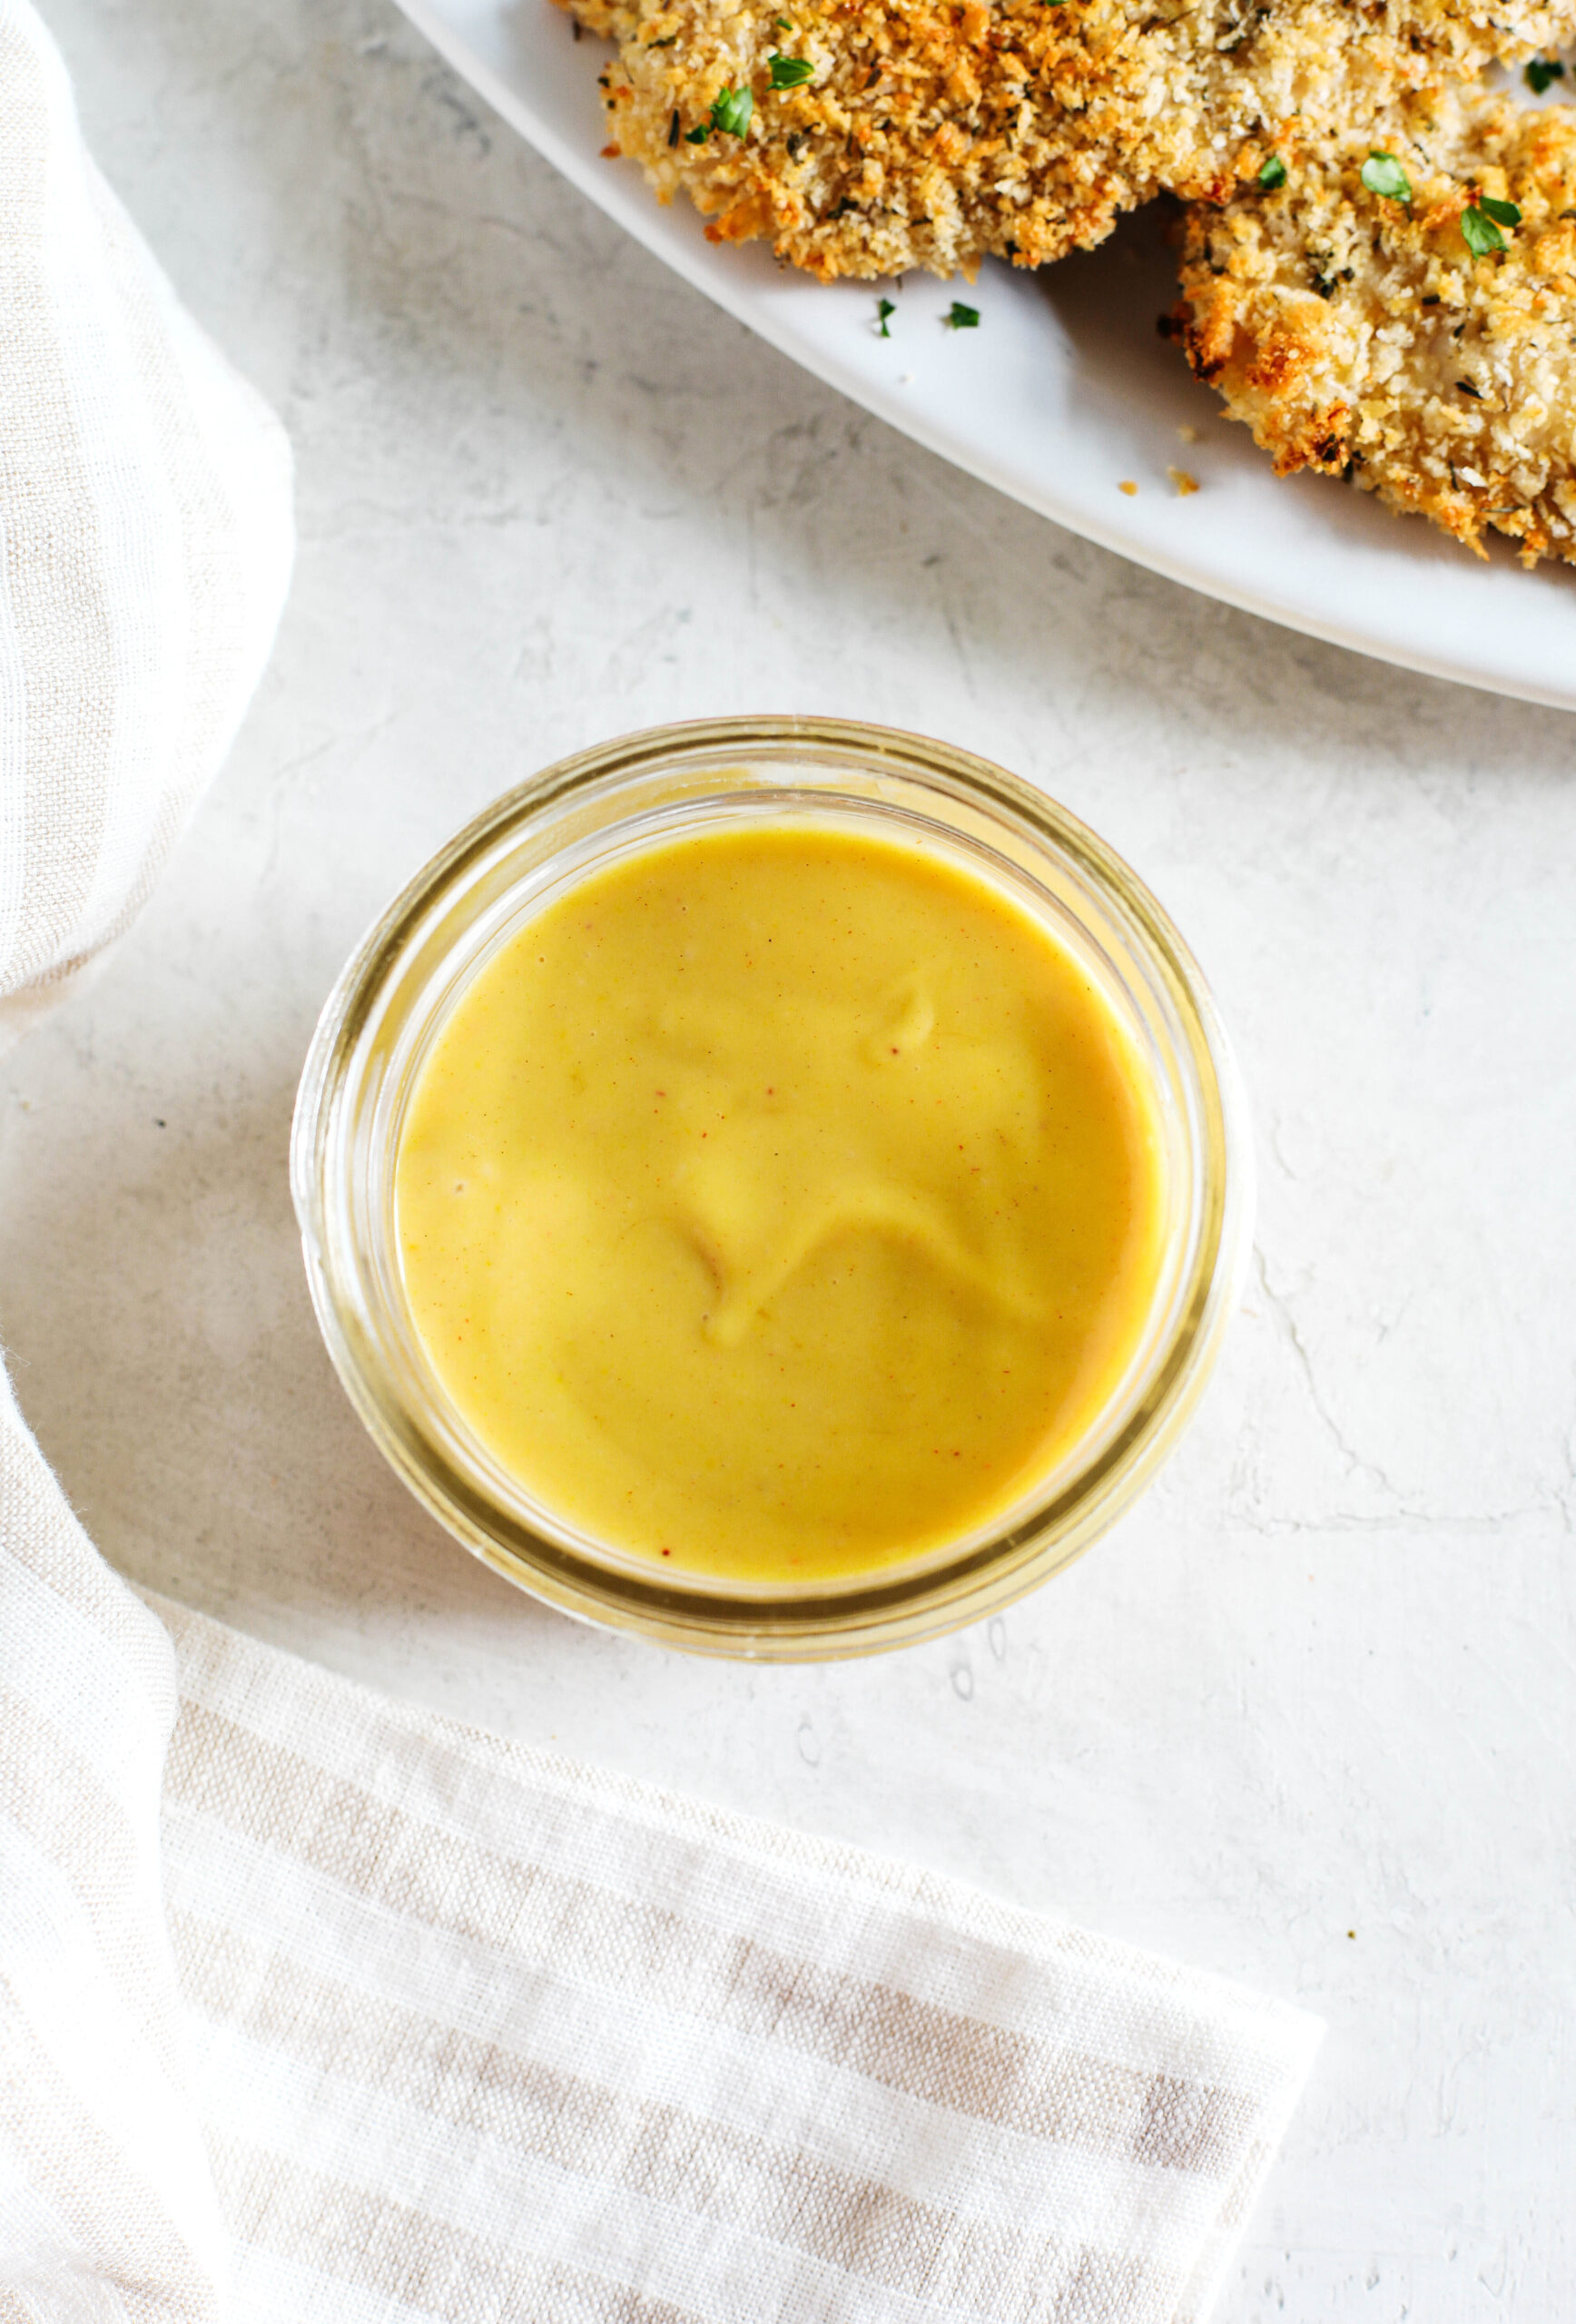 Creamy homemade Honey Mustard Sauce easily made in just minutes with a few simple ingredients perfect for dipping chicken tenders, fries, veggies, and more!